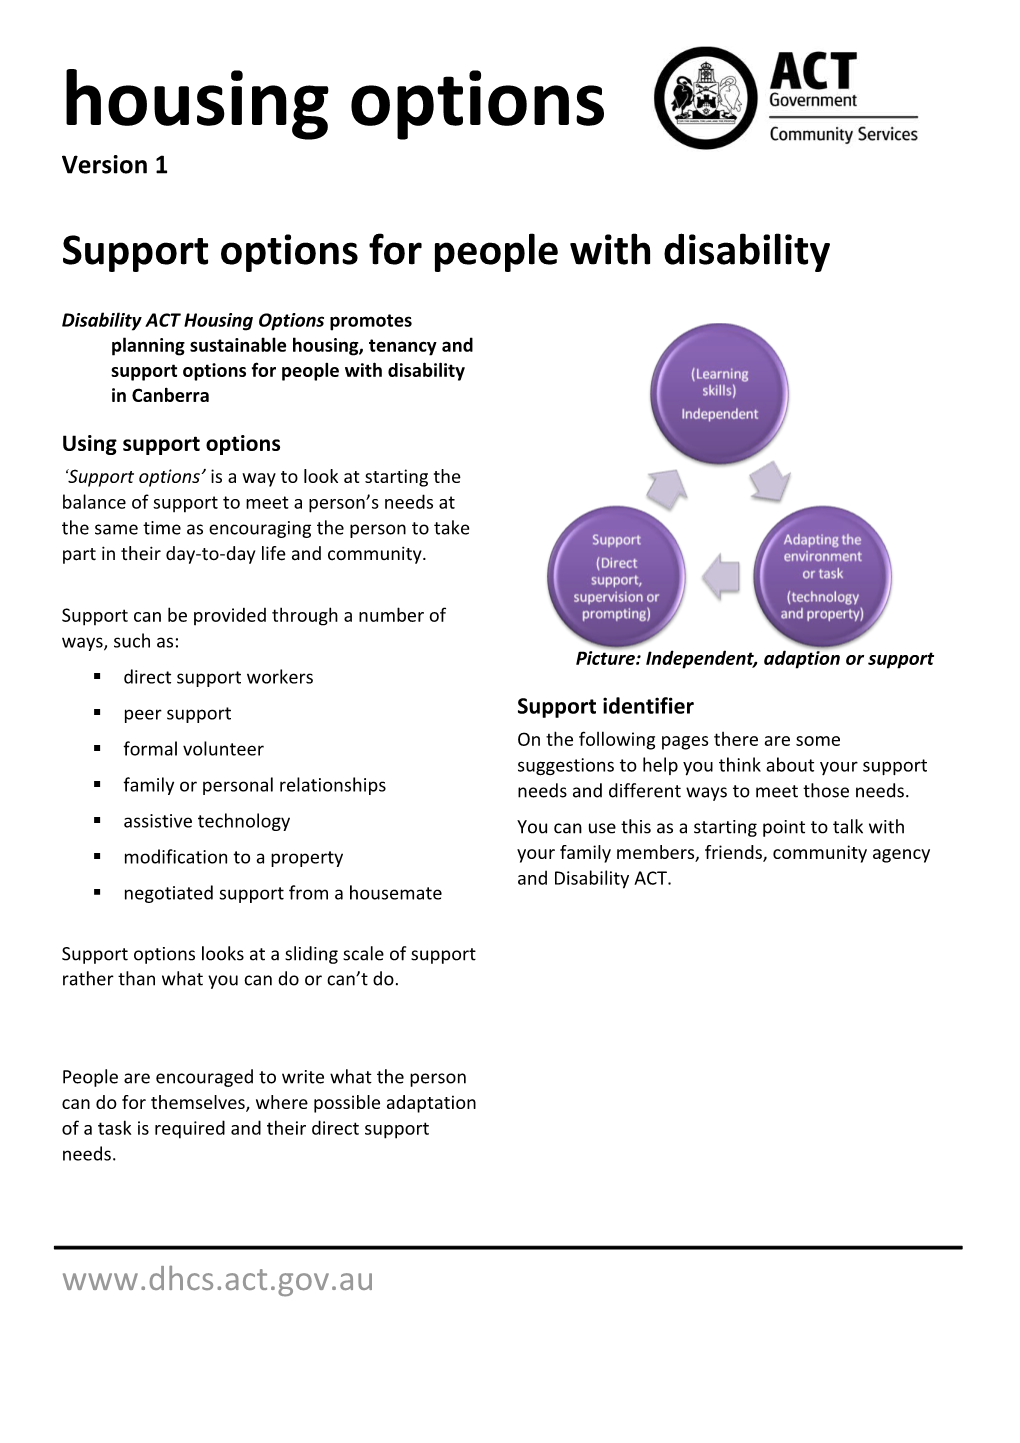 Support Options for People with Disability